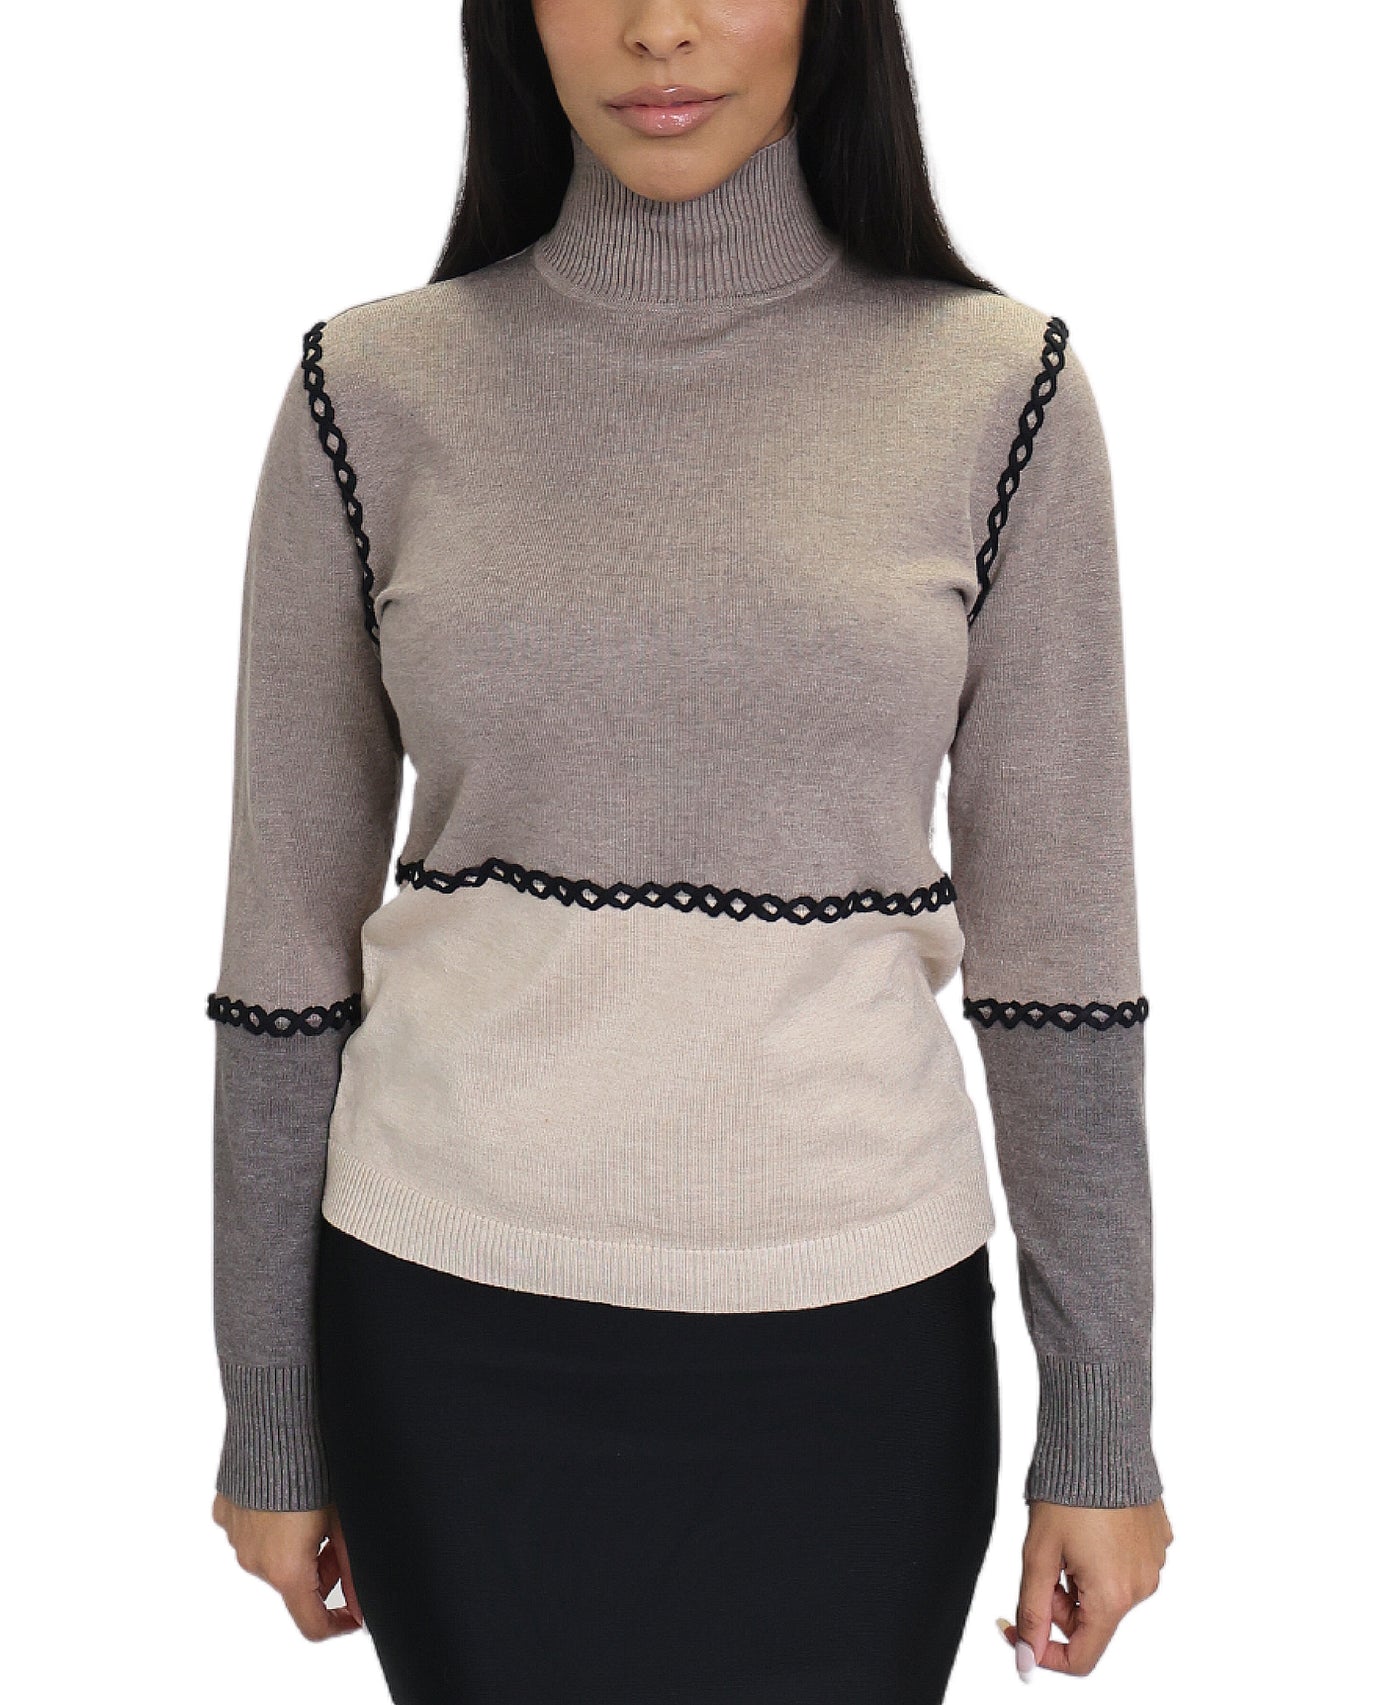 Colorblock Sweater w/ Stitching Detail image 1